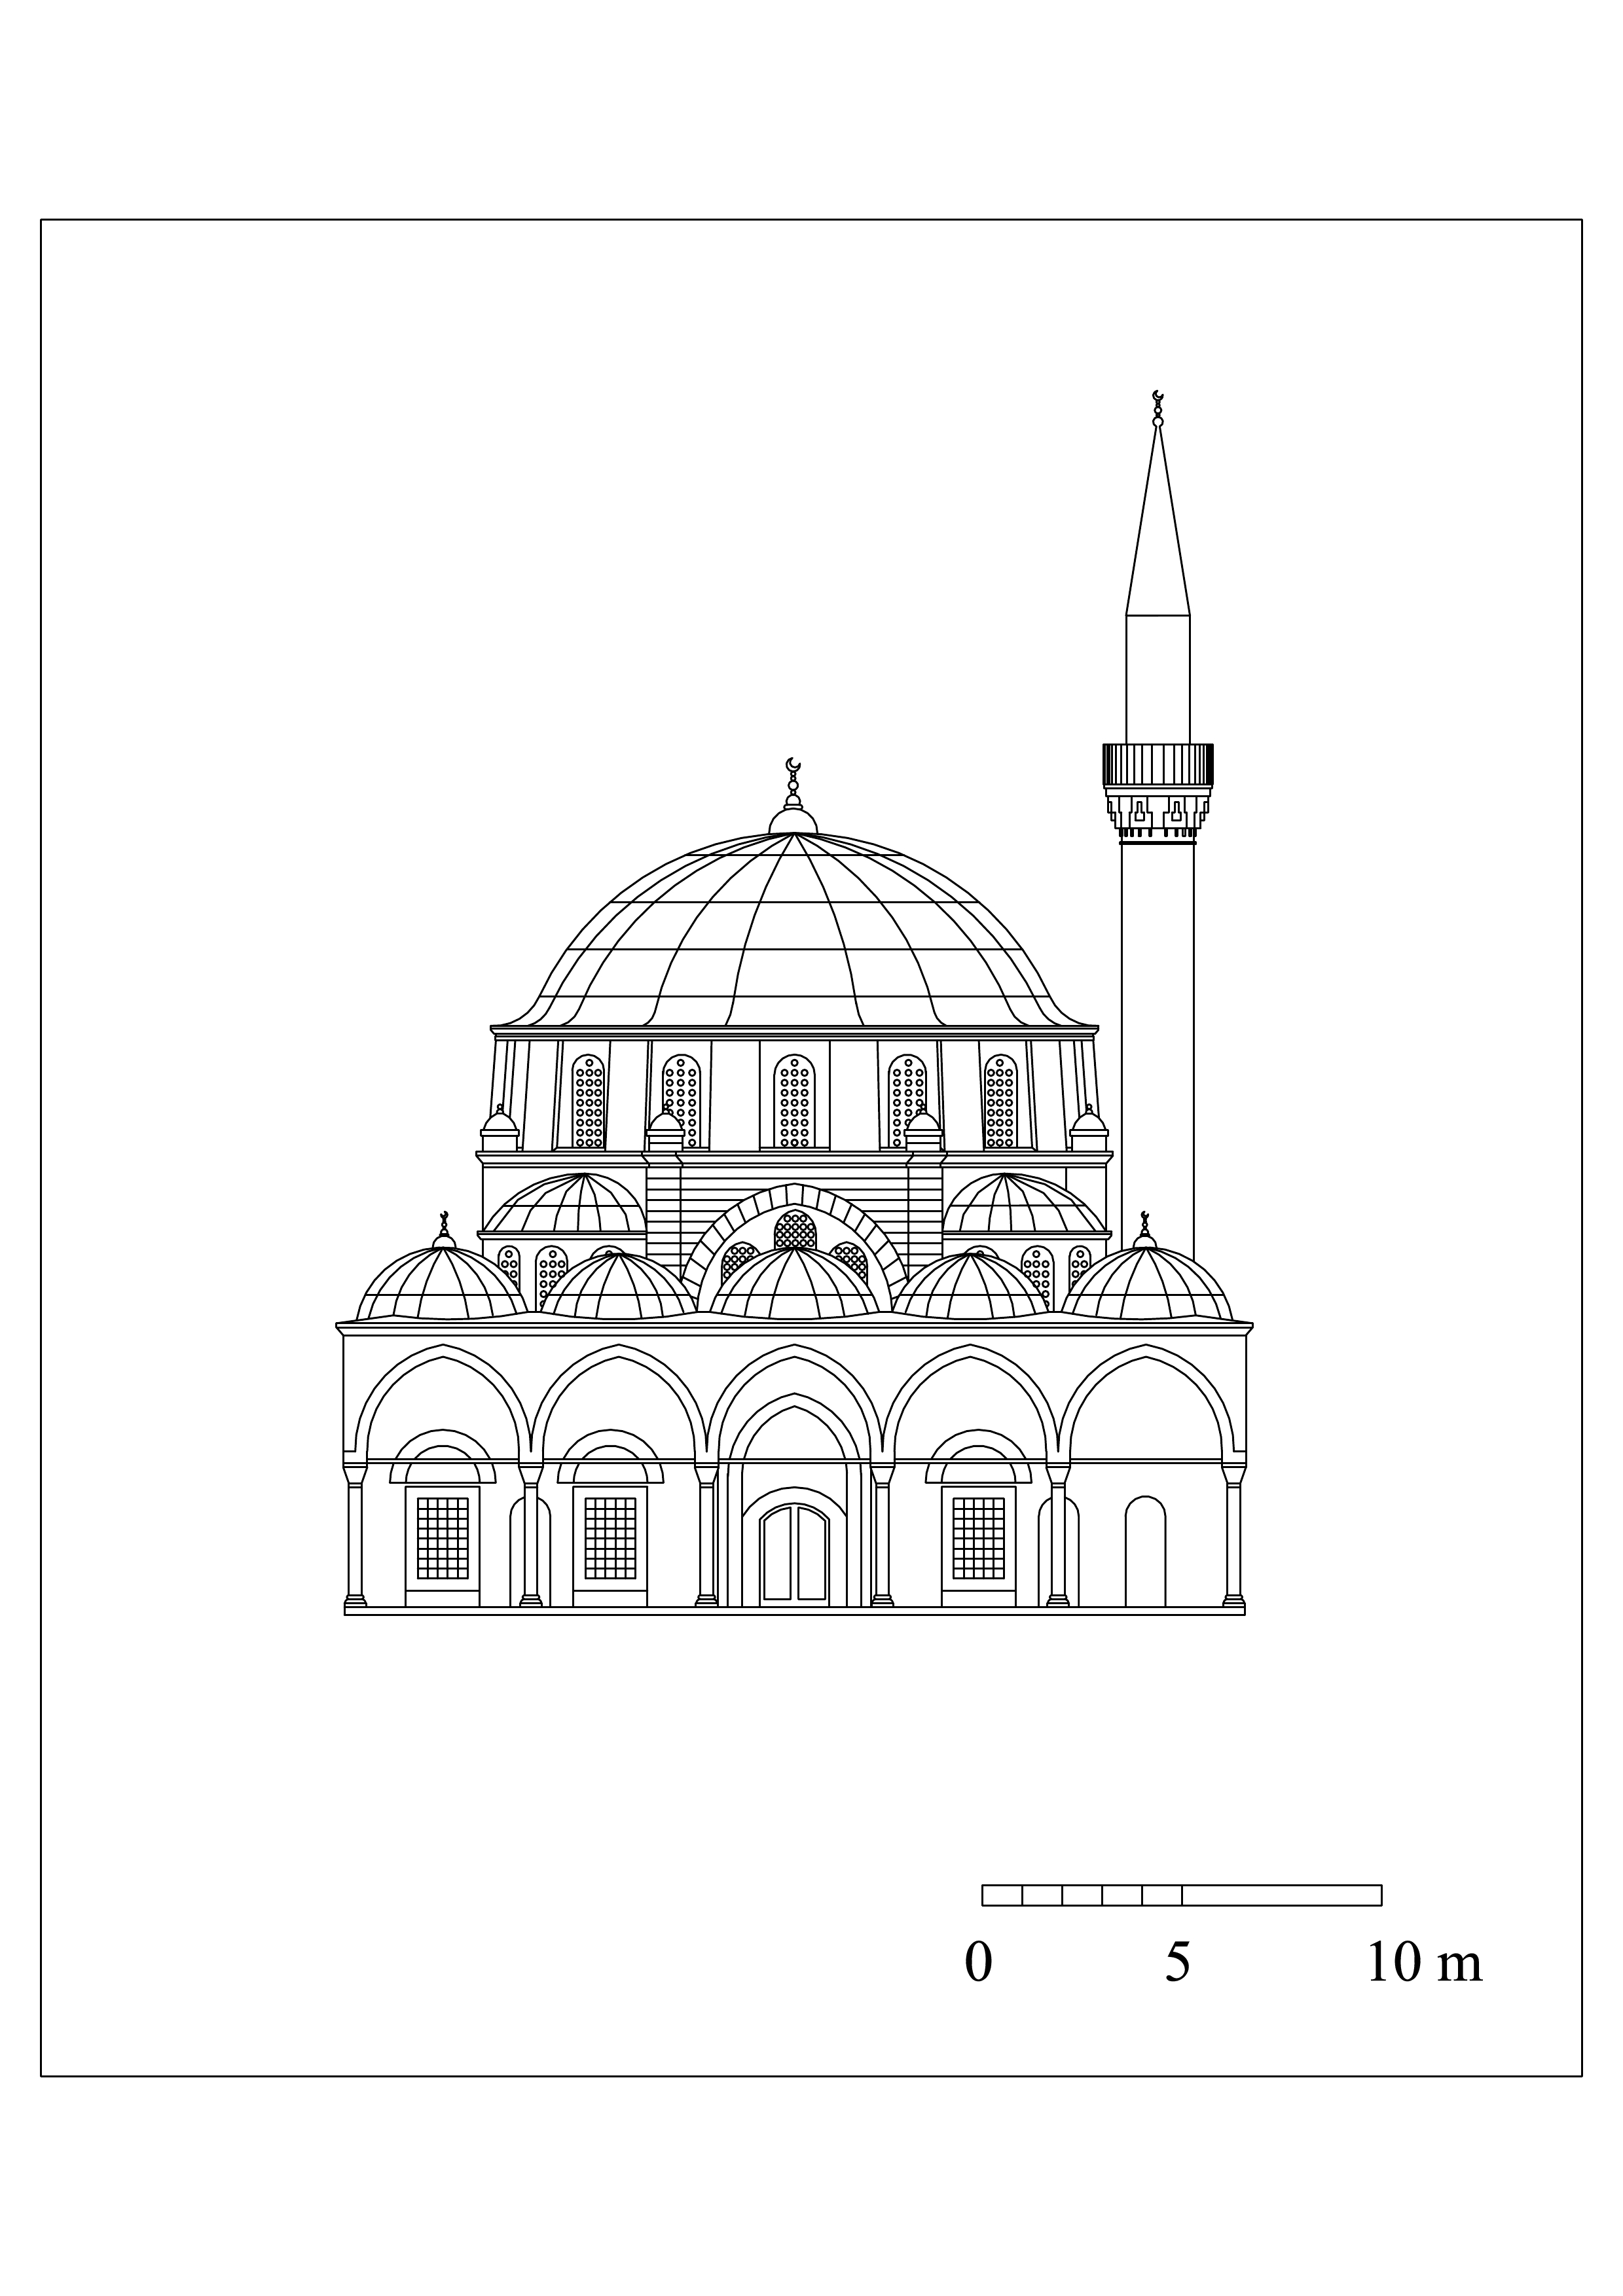 Elevation drawing of mosque